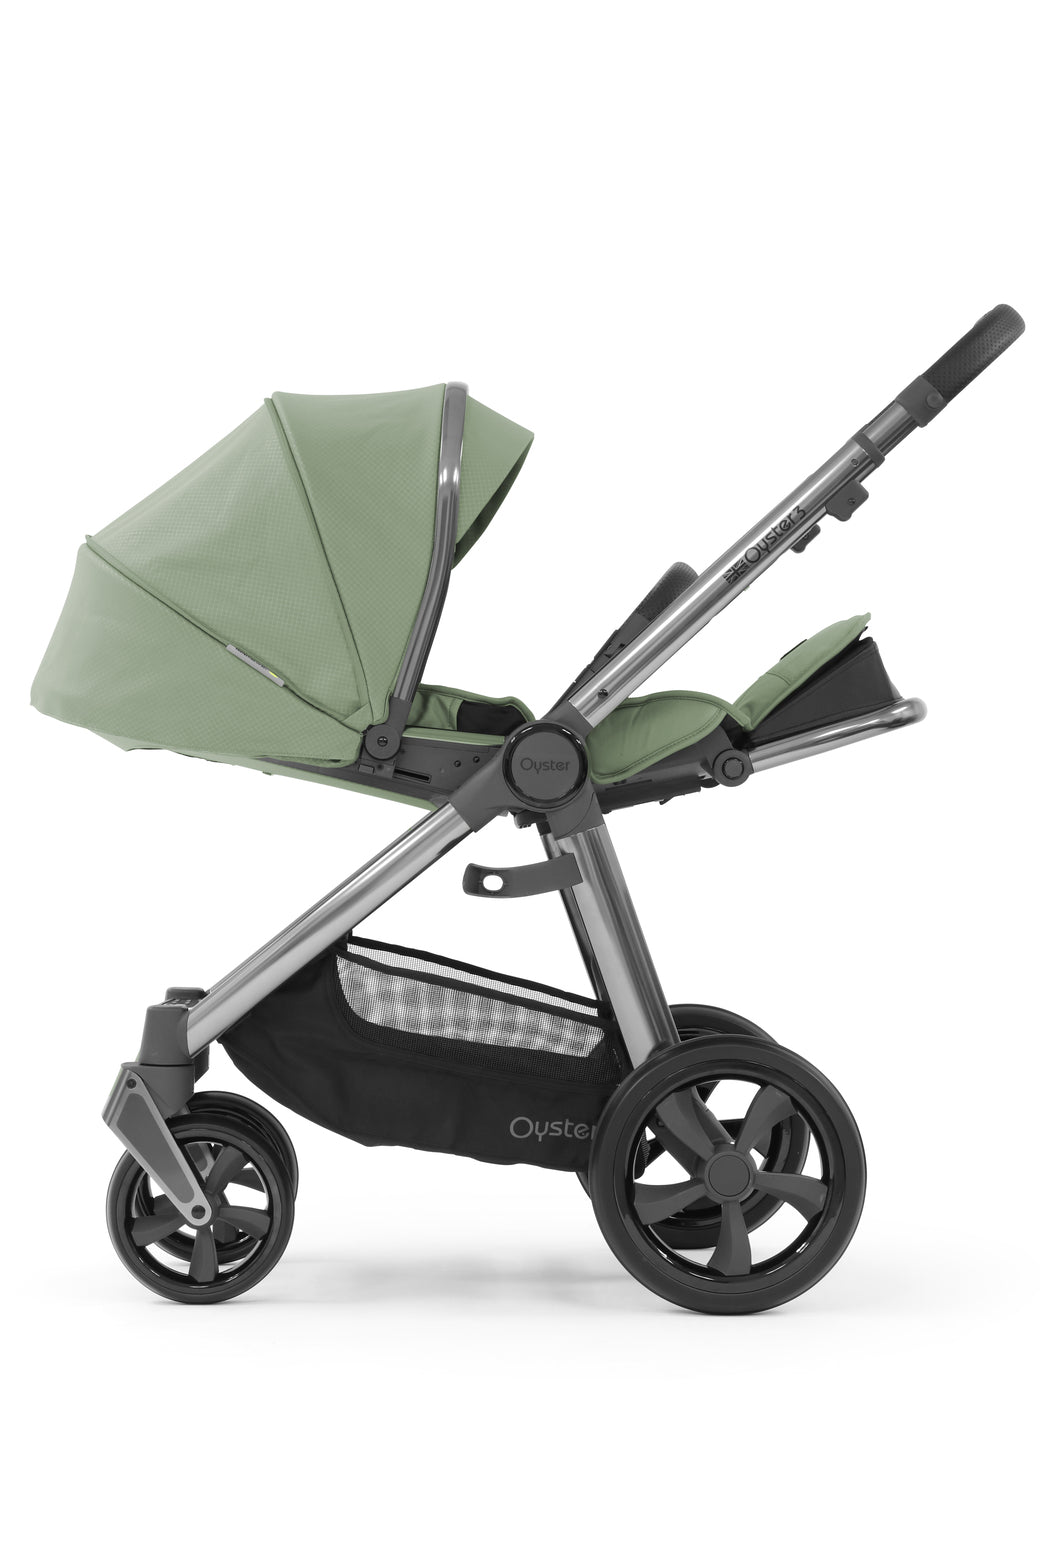 Babystyle Oyster 3 Luxury 7 Piece Travel System Bundle With Carbiofix - Spearmint -  | For Your Little One